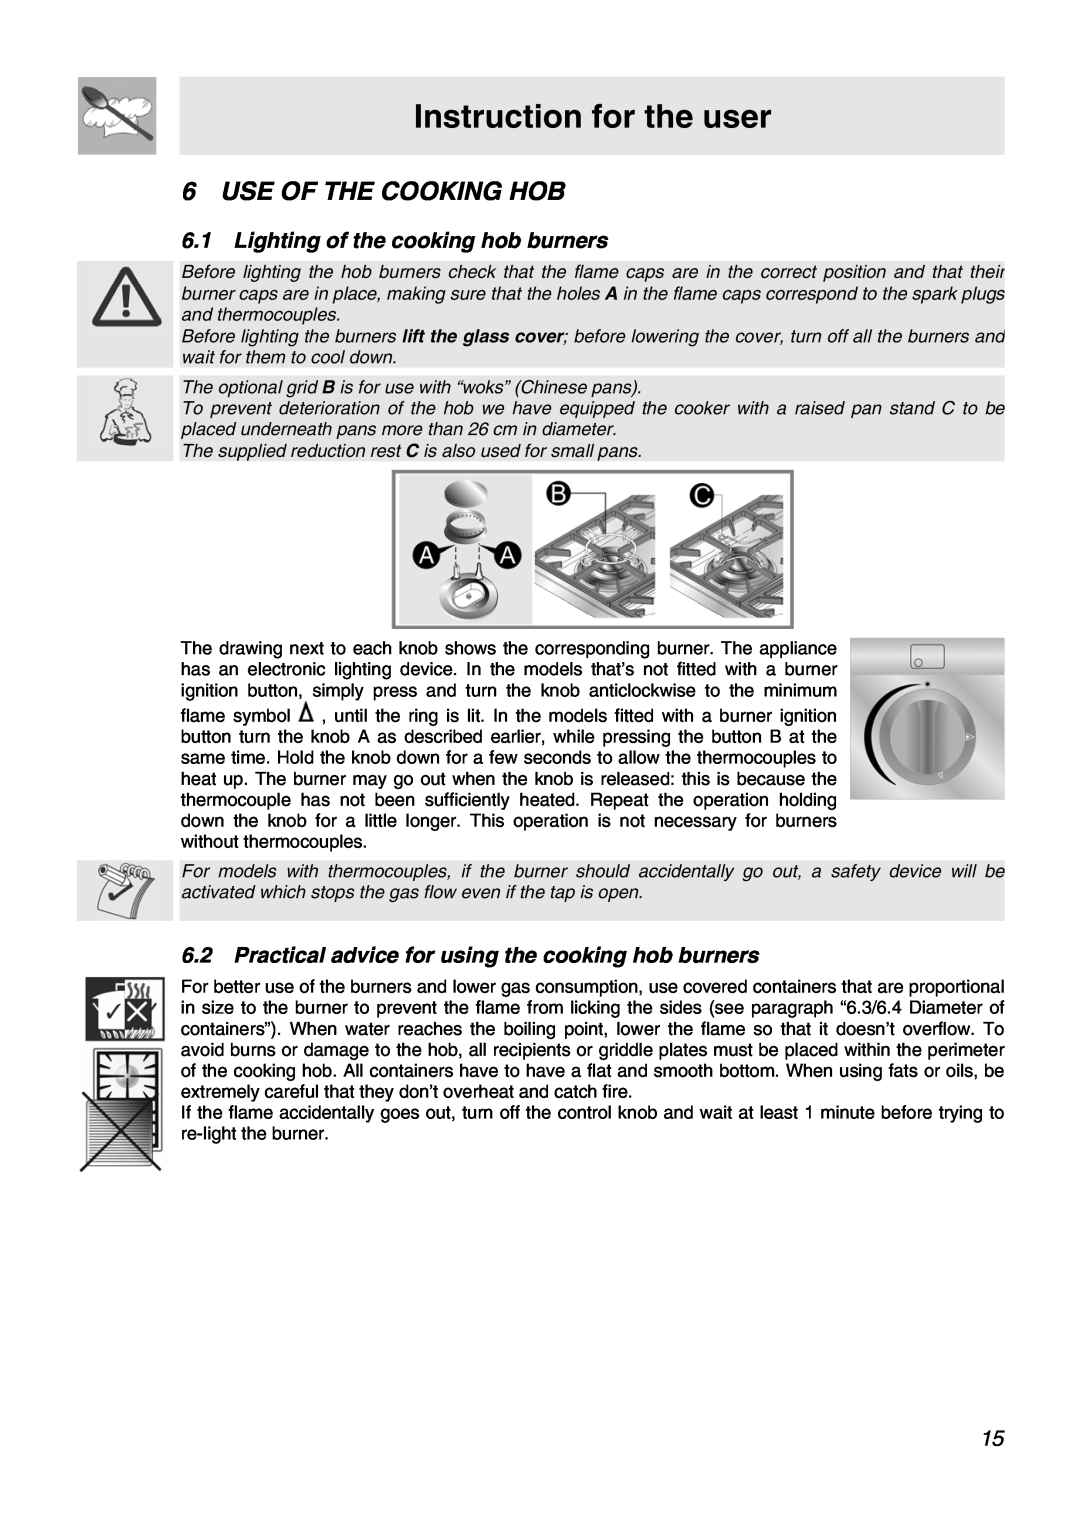 Smeg APC61XVG, APC61BVG manual Use Of The Cooking Hob, Lighting of the cooking hob burners, Instruction for the user 